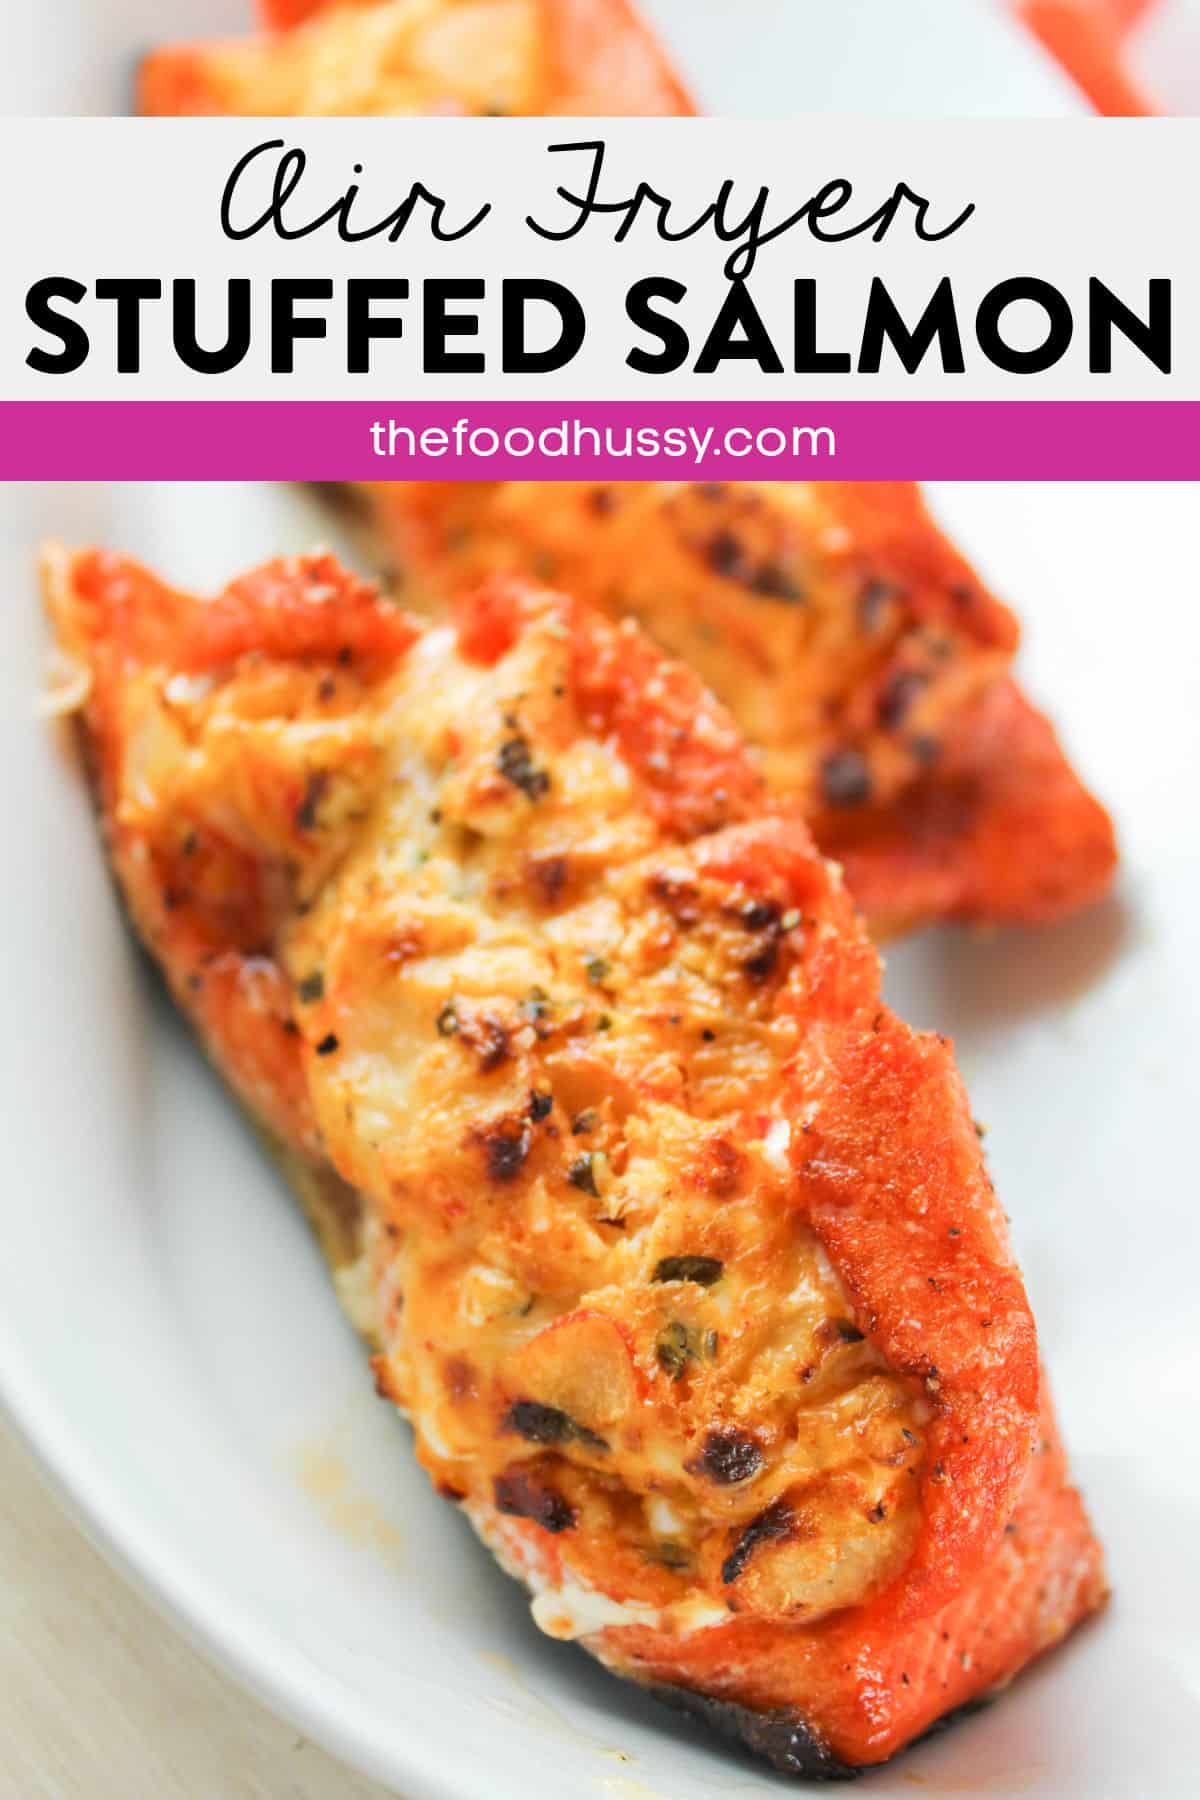 Stuffed Salmon in the Air Fryer is a delicious, healthy and FAST dinner you can make any night of the week! This delicious salmon is stuffed with cream cheese, cheese, crab, dijon mustard and my favorite seasonings! via @foodhussy